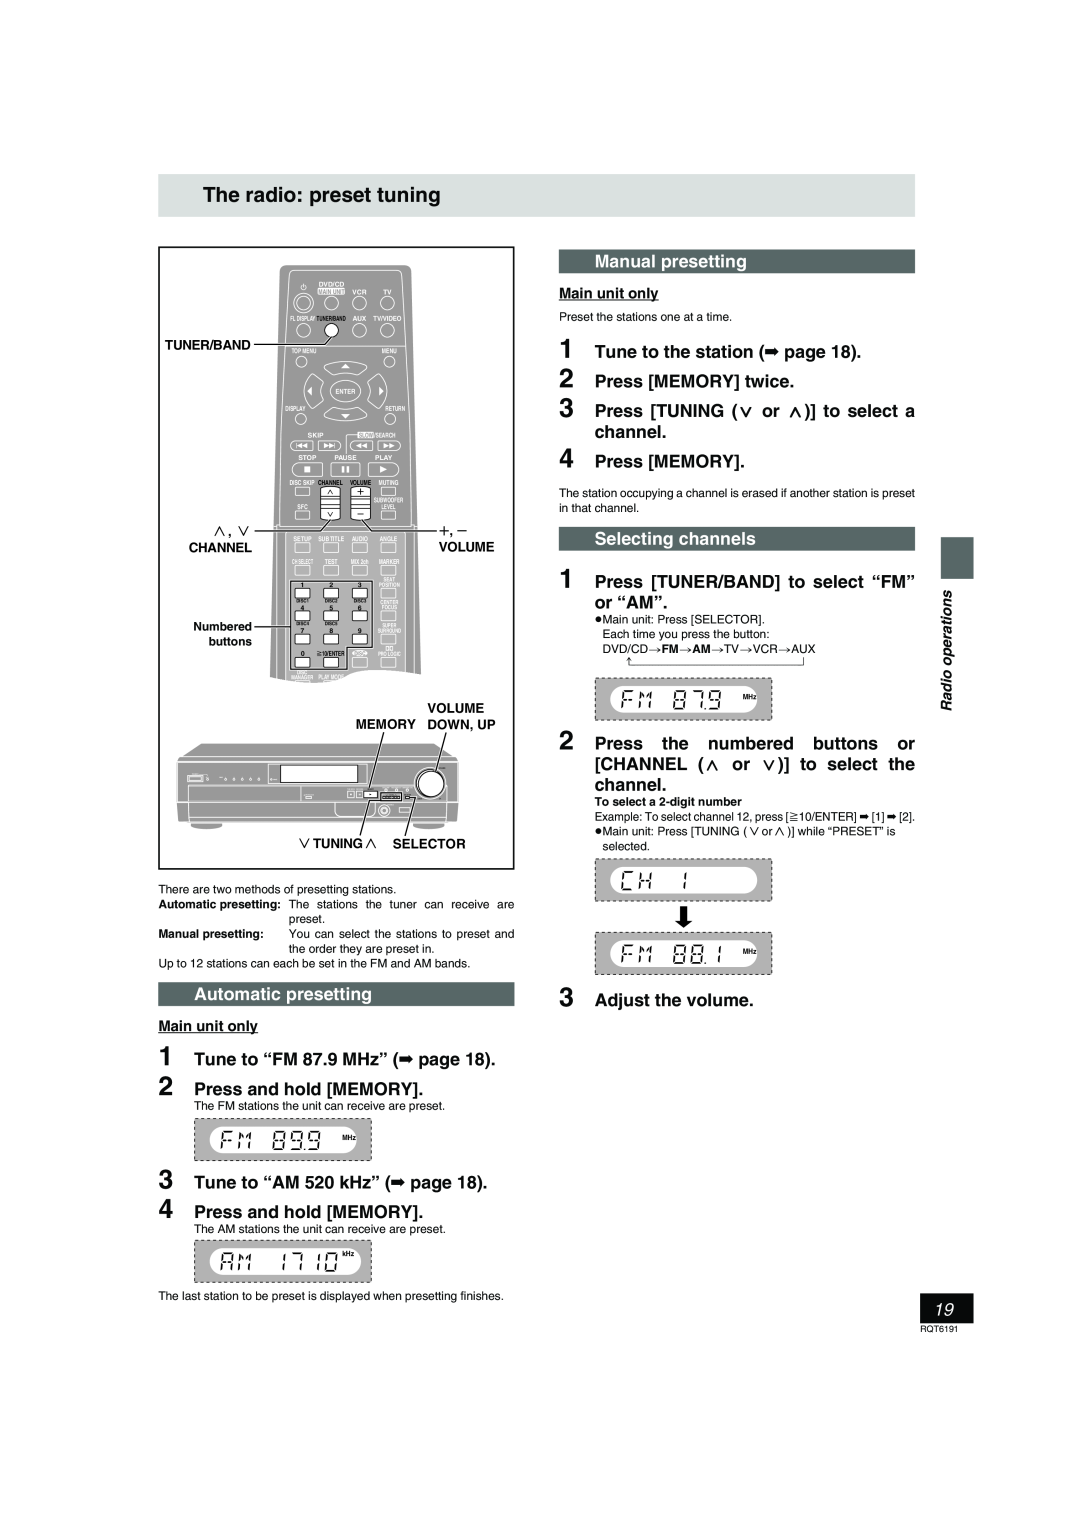 Panasonic SC-HT67 The radio preset tuning, Automatic presetting, 1Tune to “FM 87.9 MHz” page, 2Press and hold MEMORY 